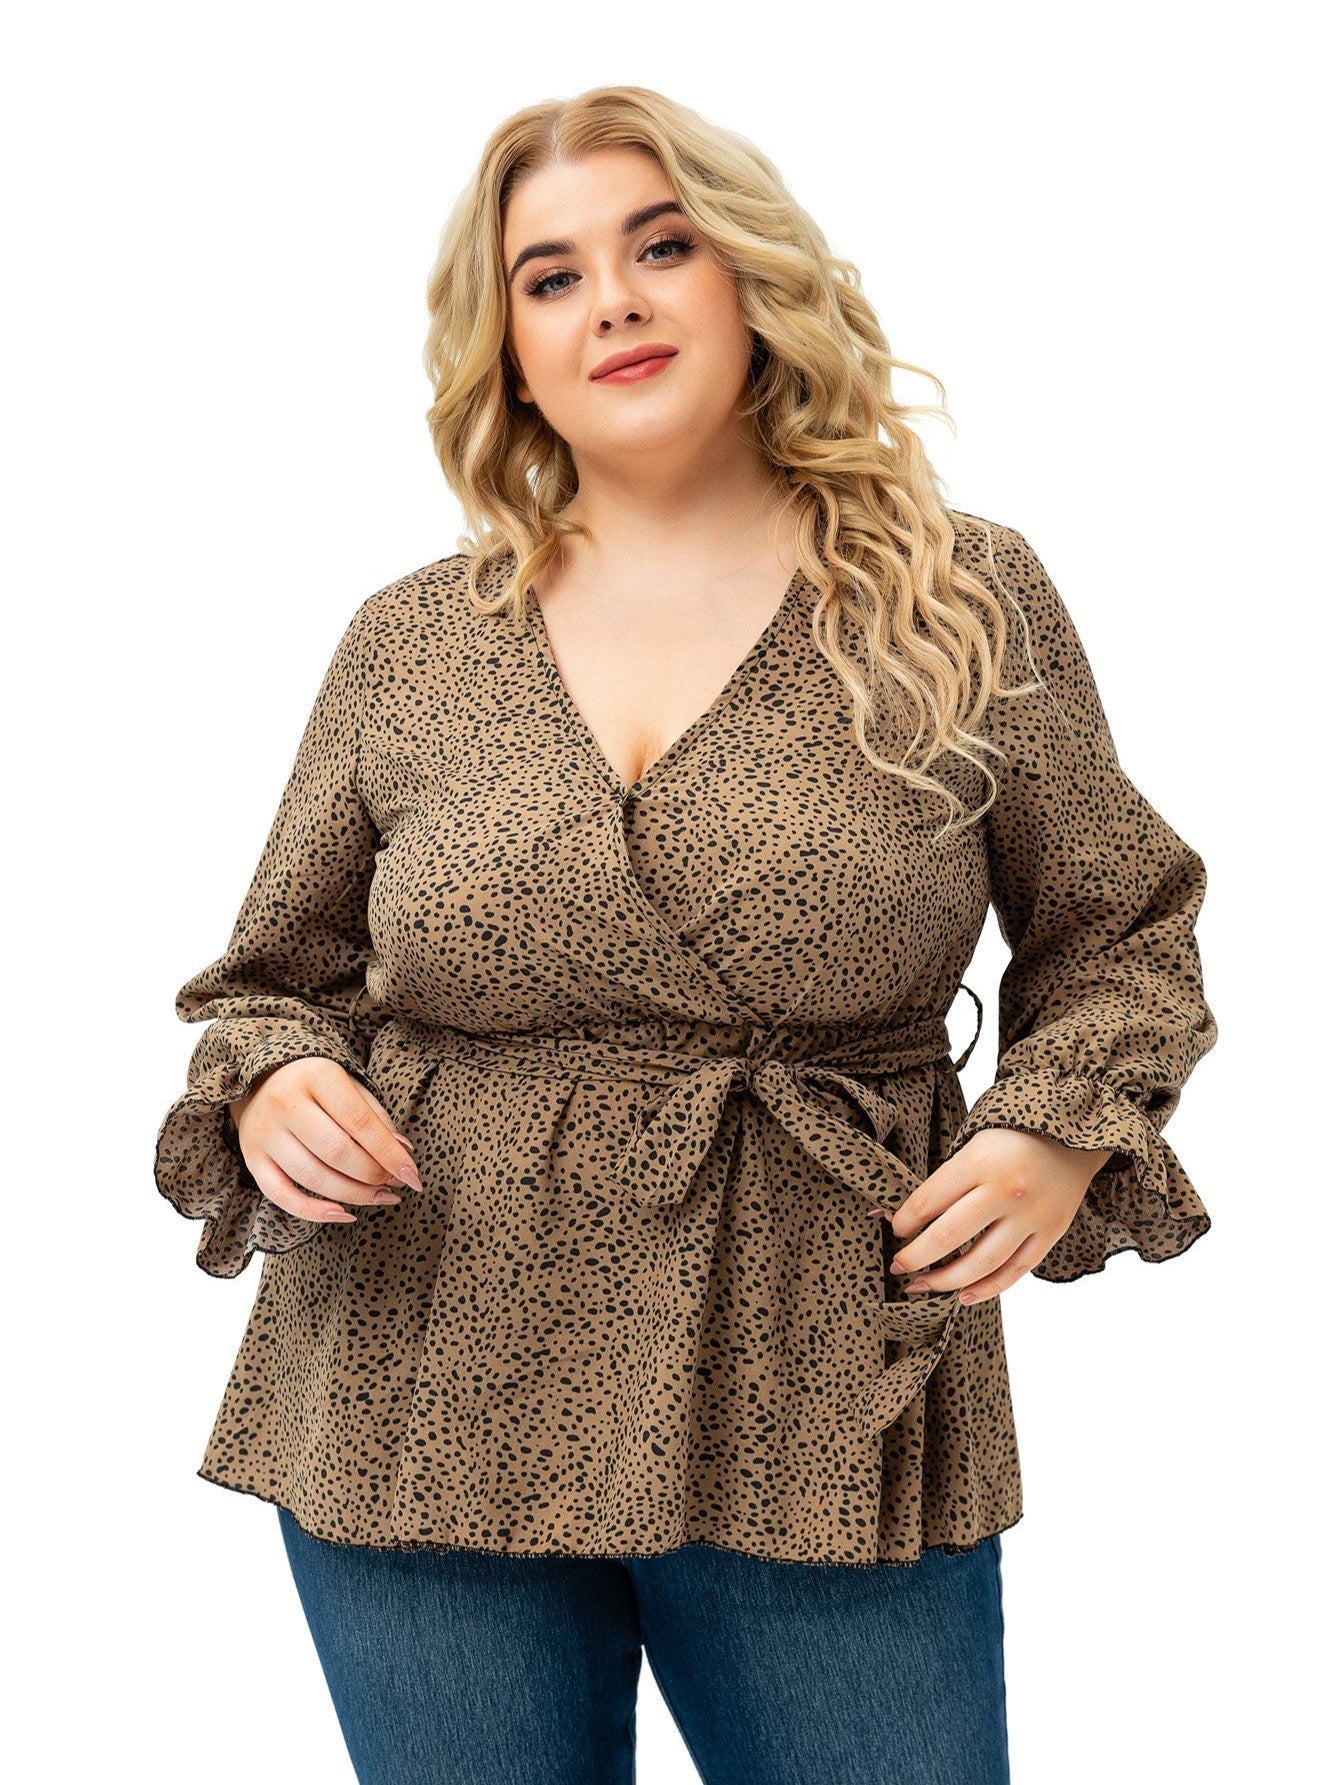 Long Sleeve V Neck Dots with Belt Plus Size Blouse Top Sai Feel